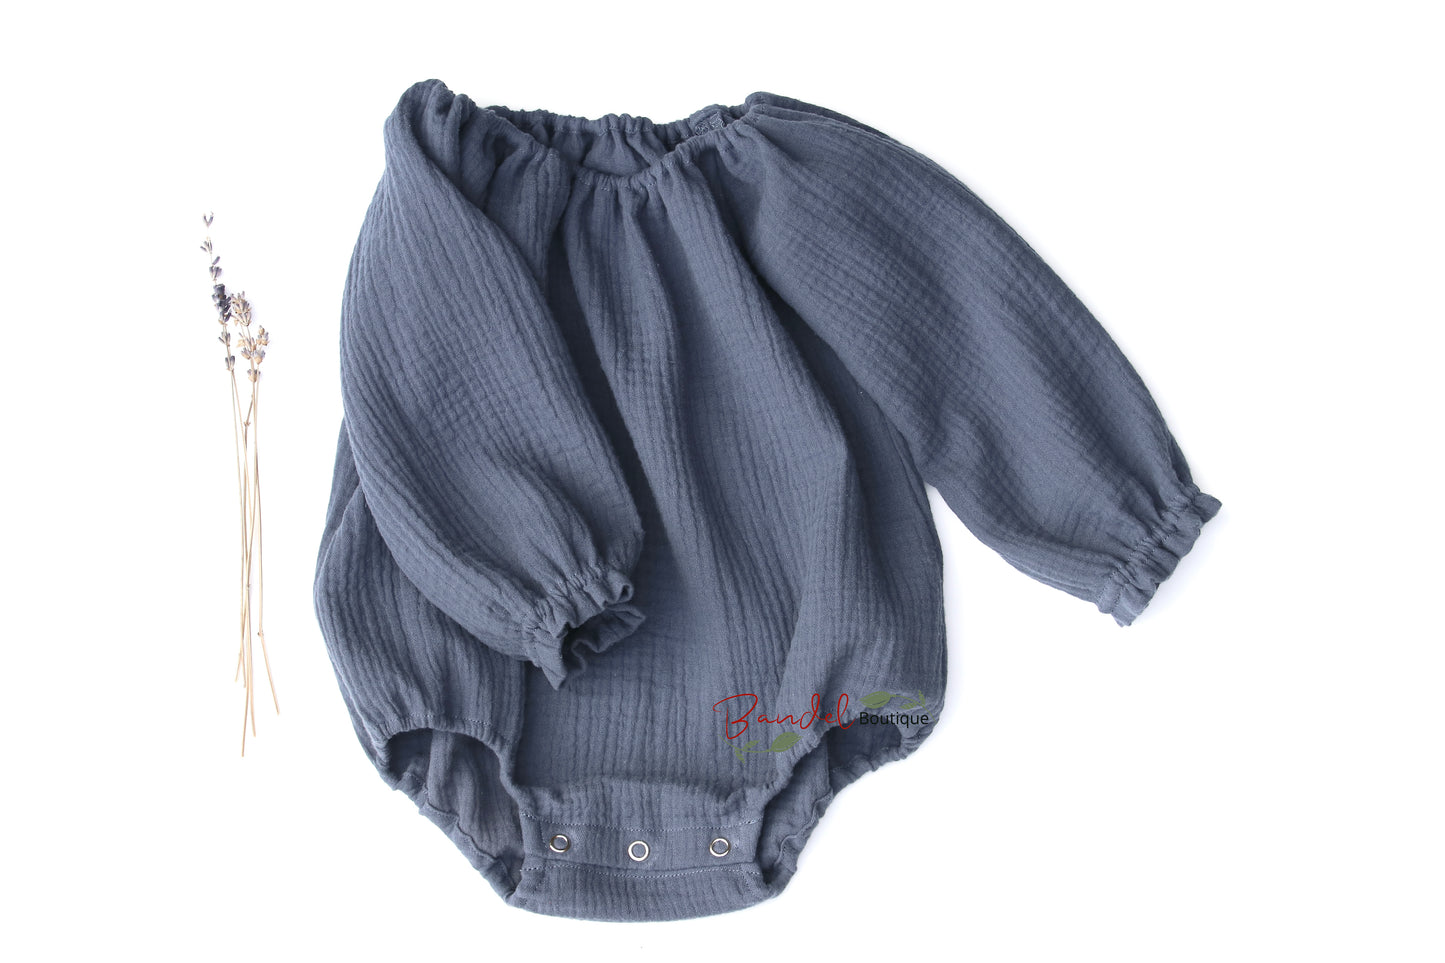 Handmade Jeans- Blue minimalist newborn baby romper with long sleeves, made from breathable and soft double gauze organic fabric. Features elasticized openings and crotch snaps for easy dressing and maximum comfort. 